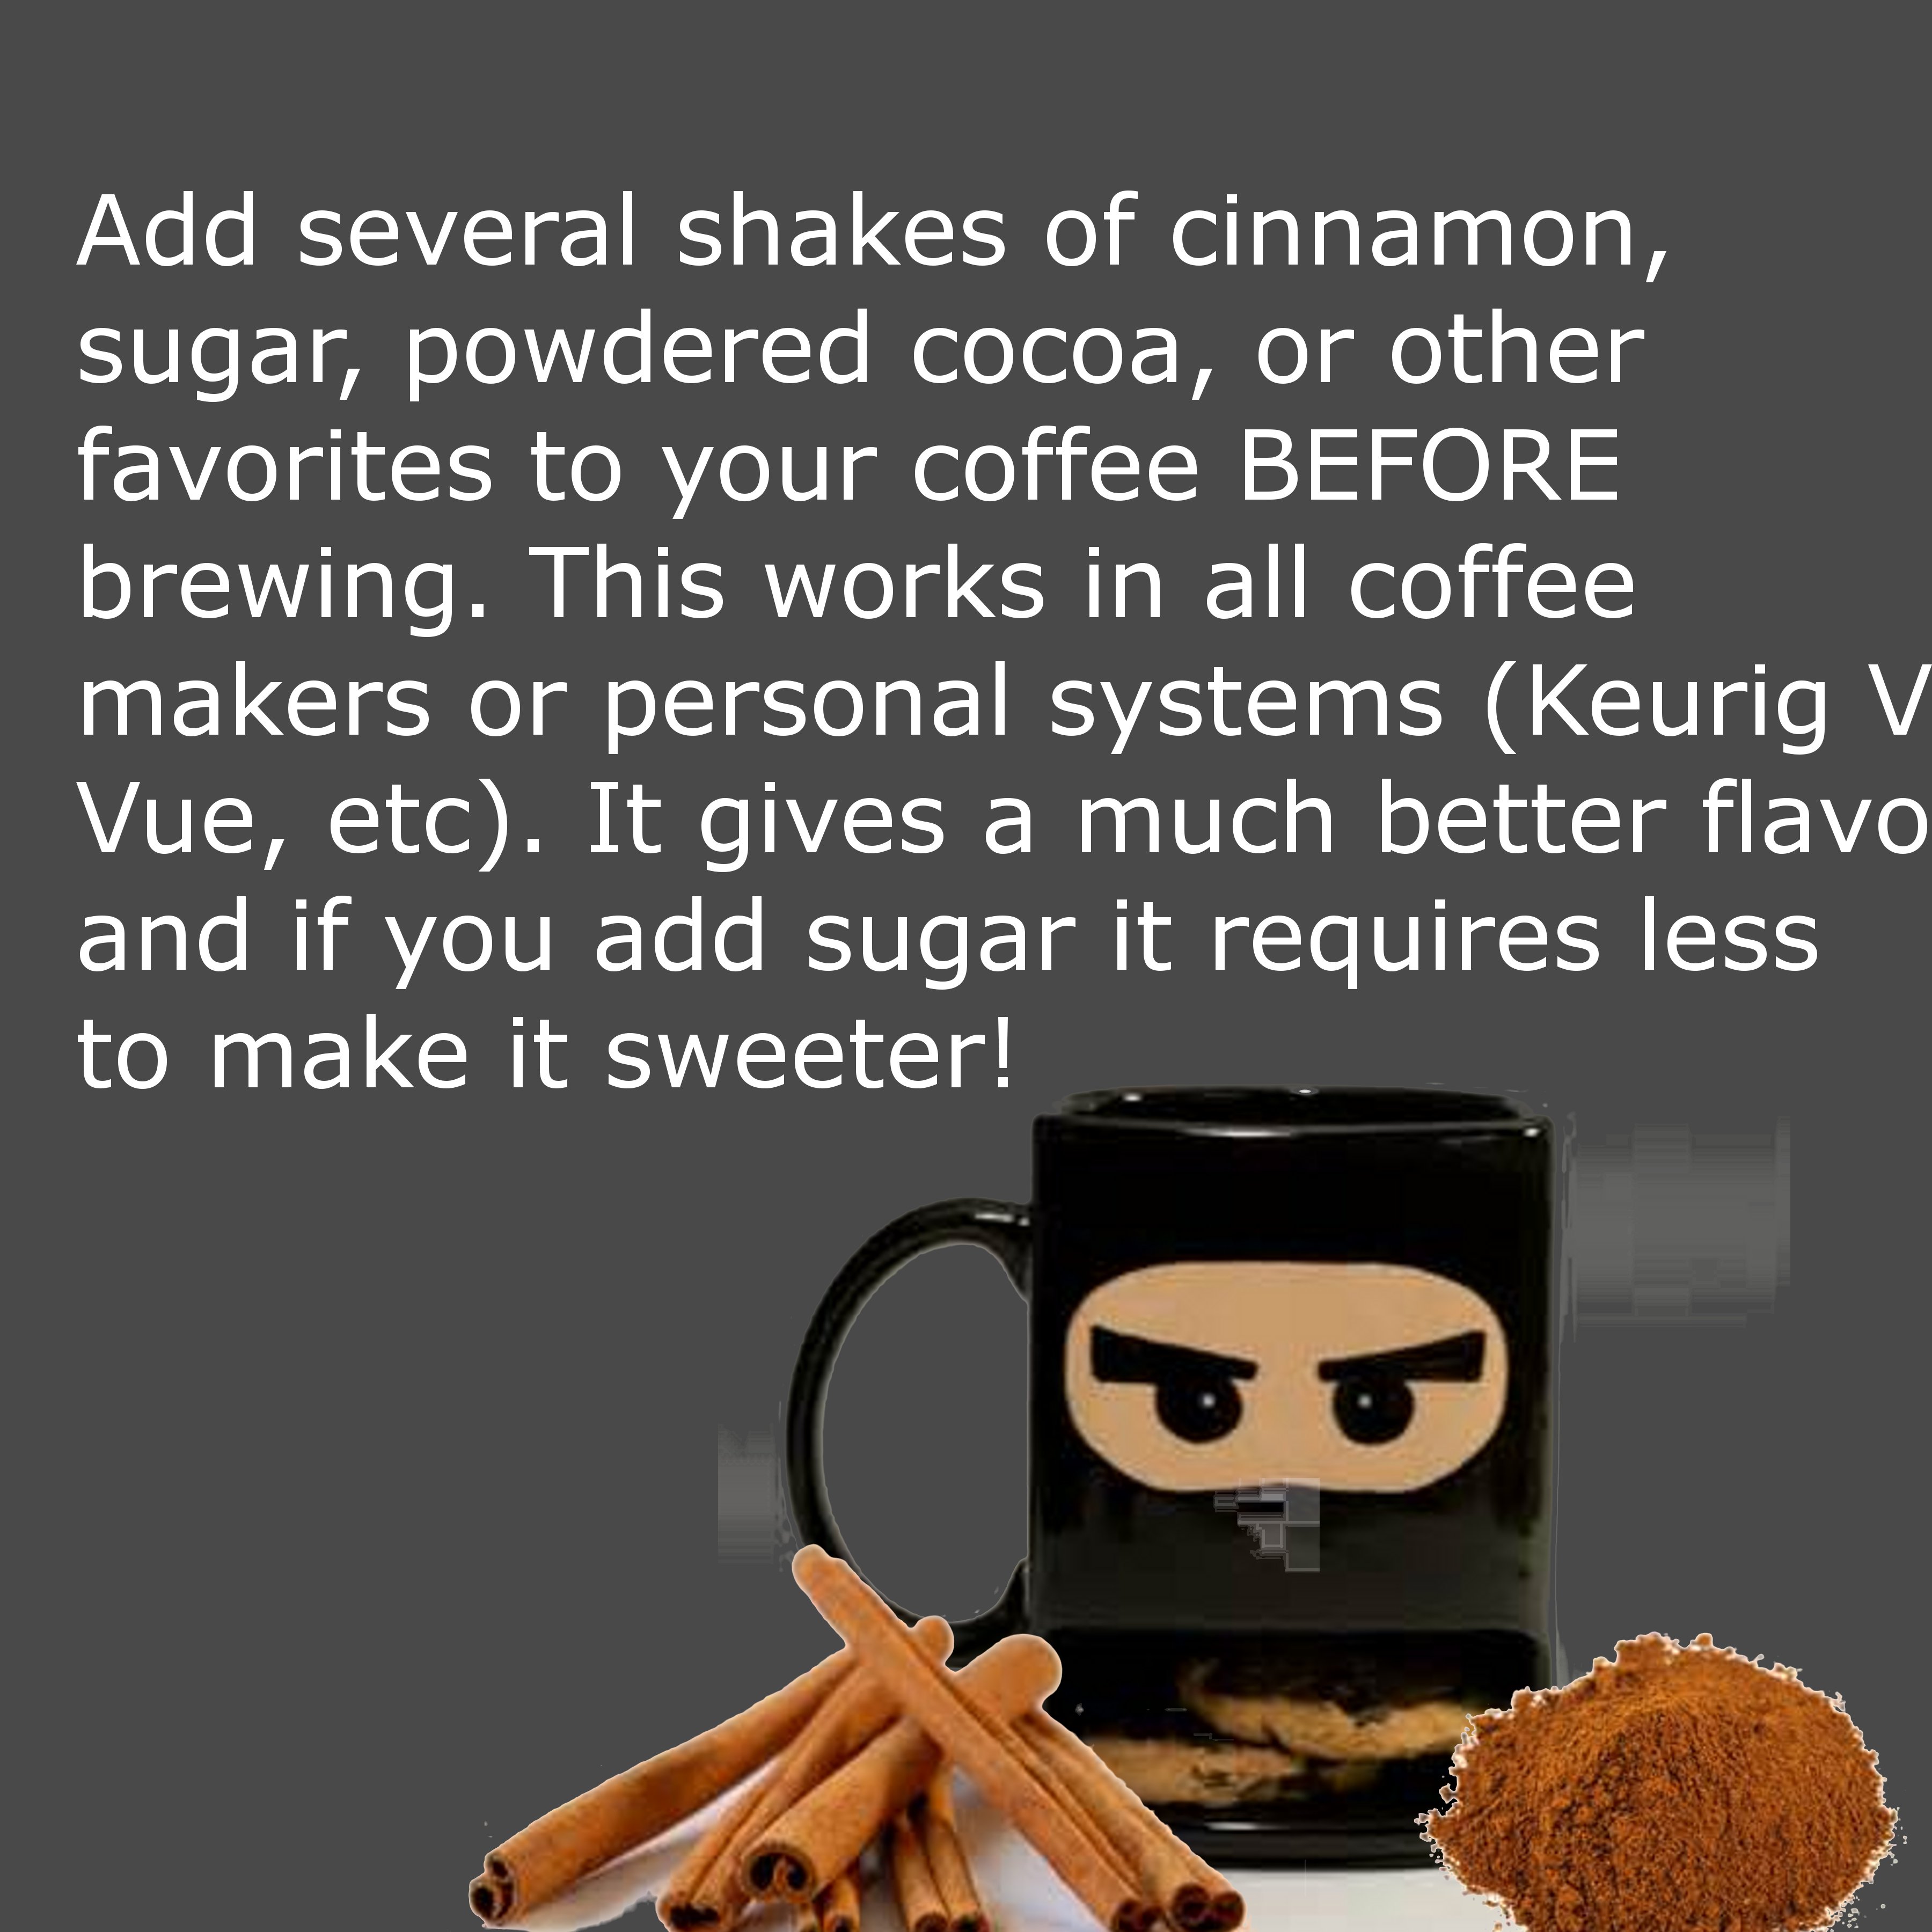 human behavior - Add several shakes of cinnamon, sugar, powdered cocoa, or other favorites to your coffee Before brewing. This works in all coffee makers or personal systems Keurig V Vue, etc. It gives a much better flavo and if you add sugar it requires 